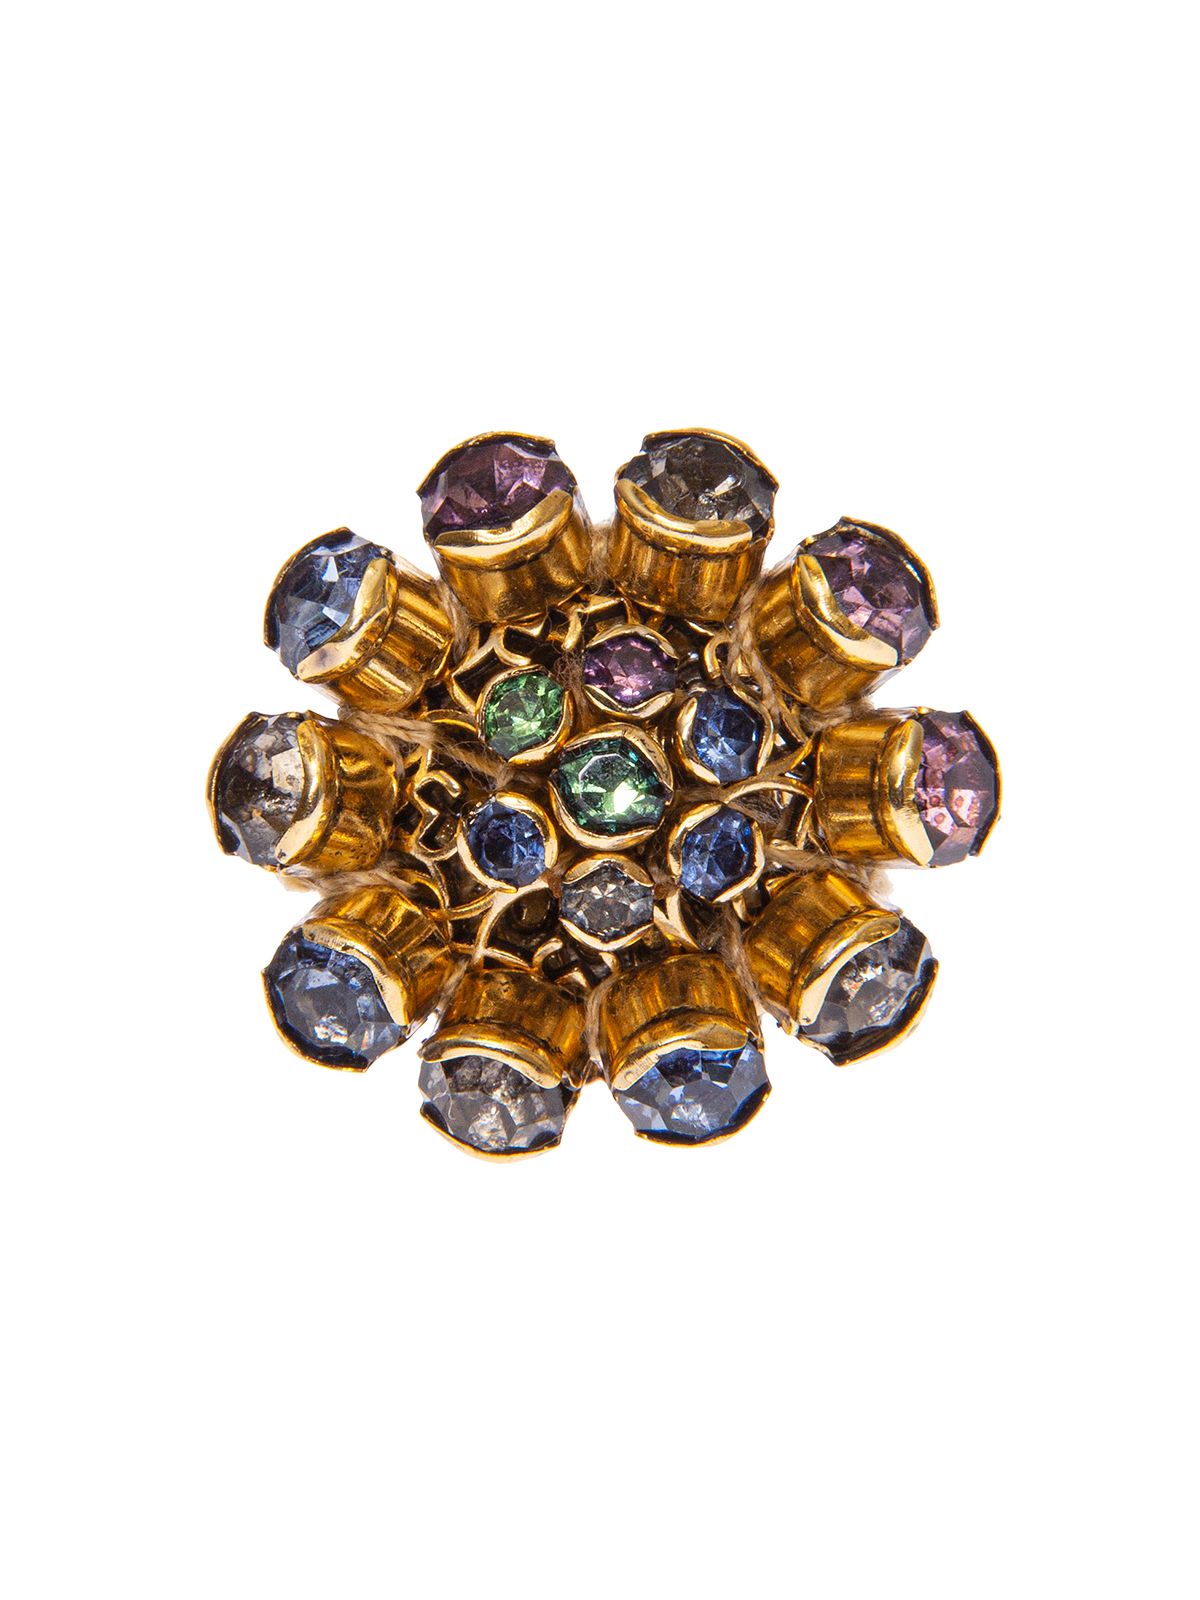 Flower ring embellished with multicolor stones